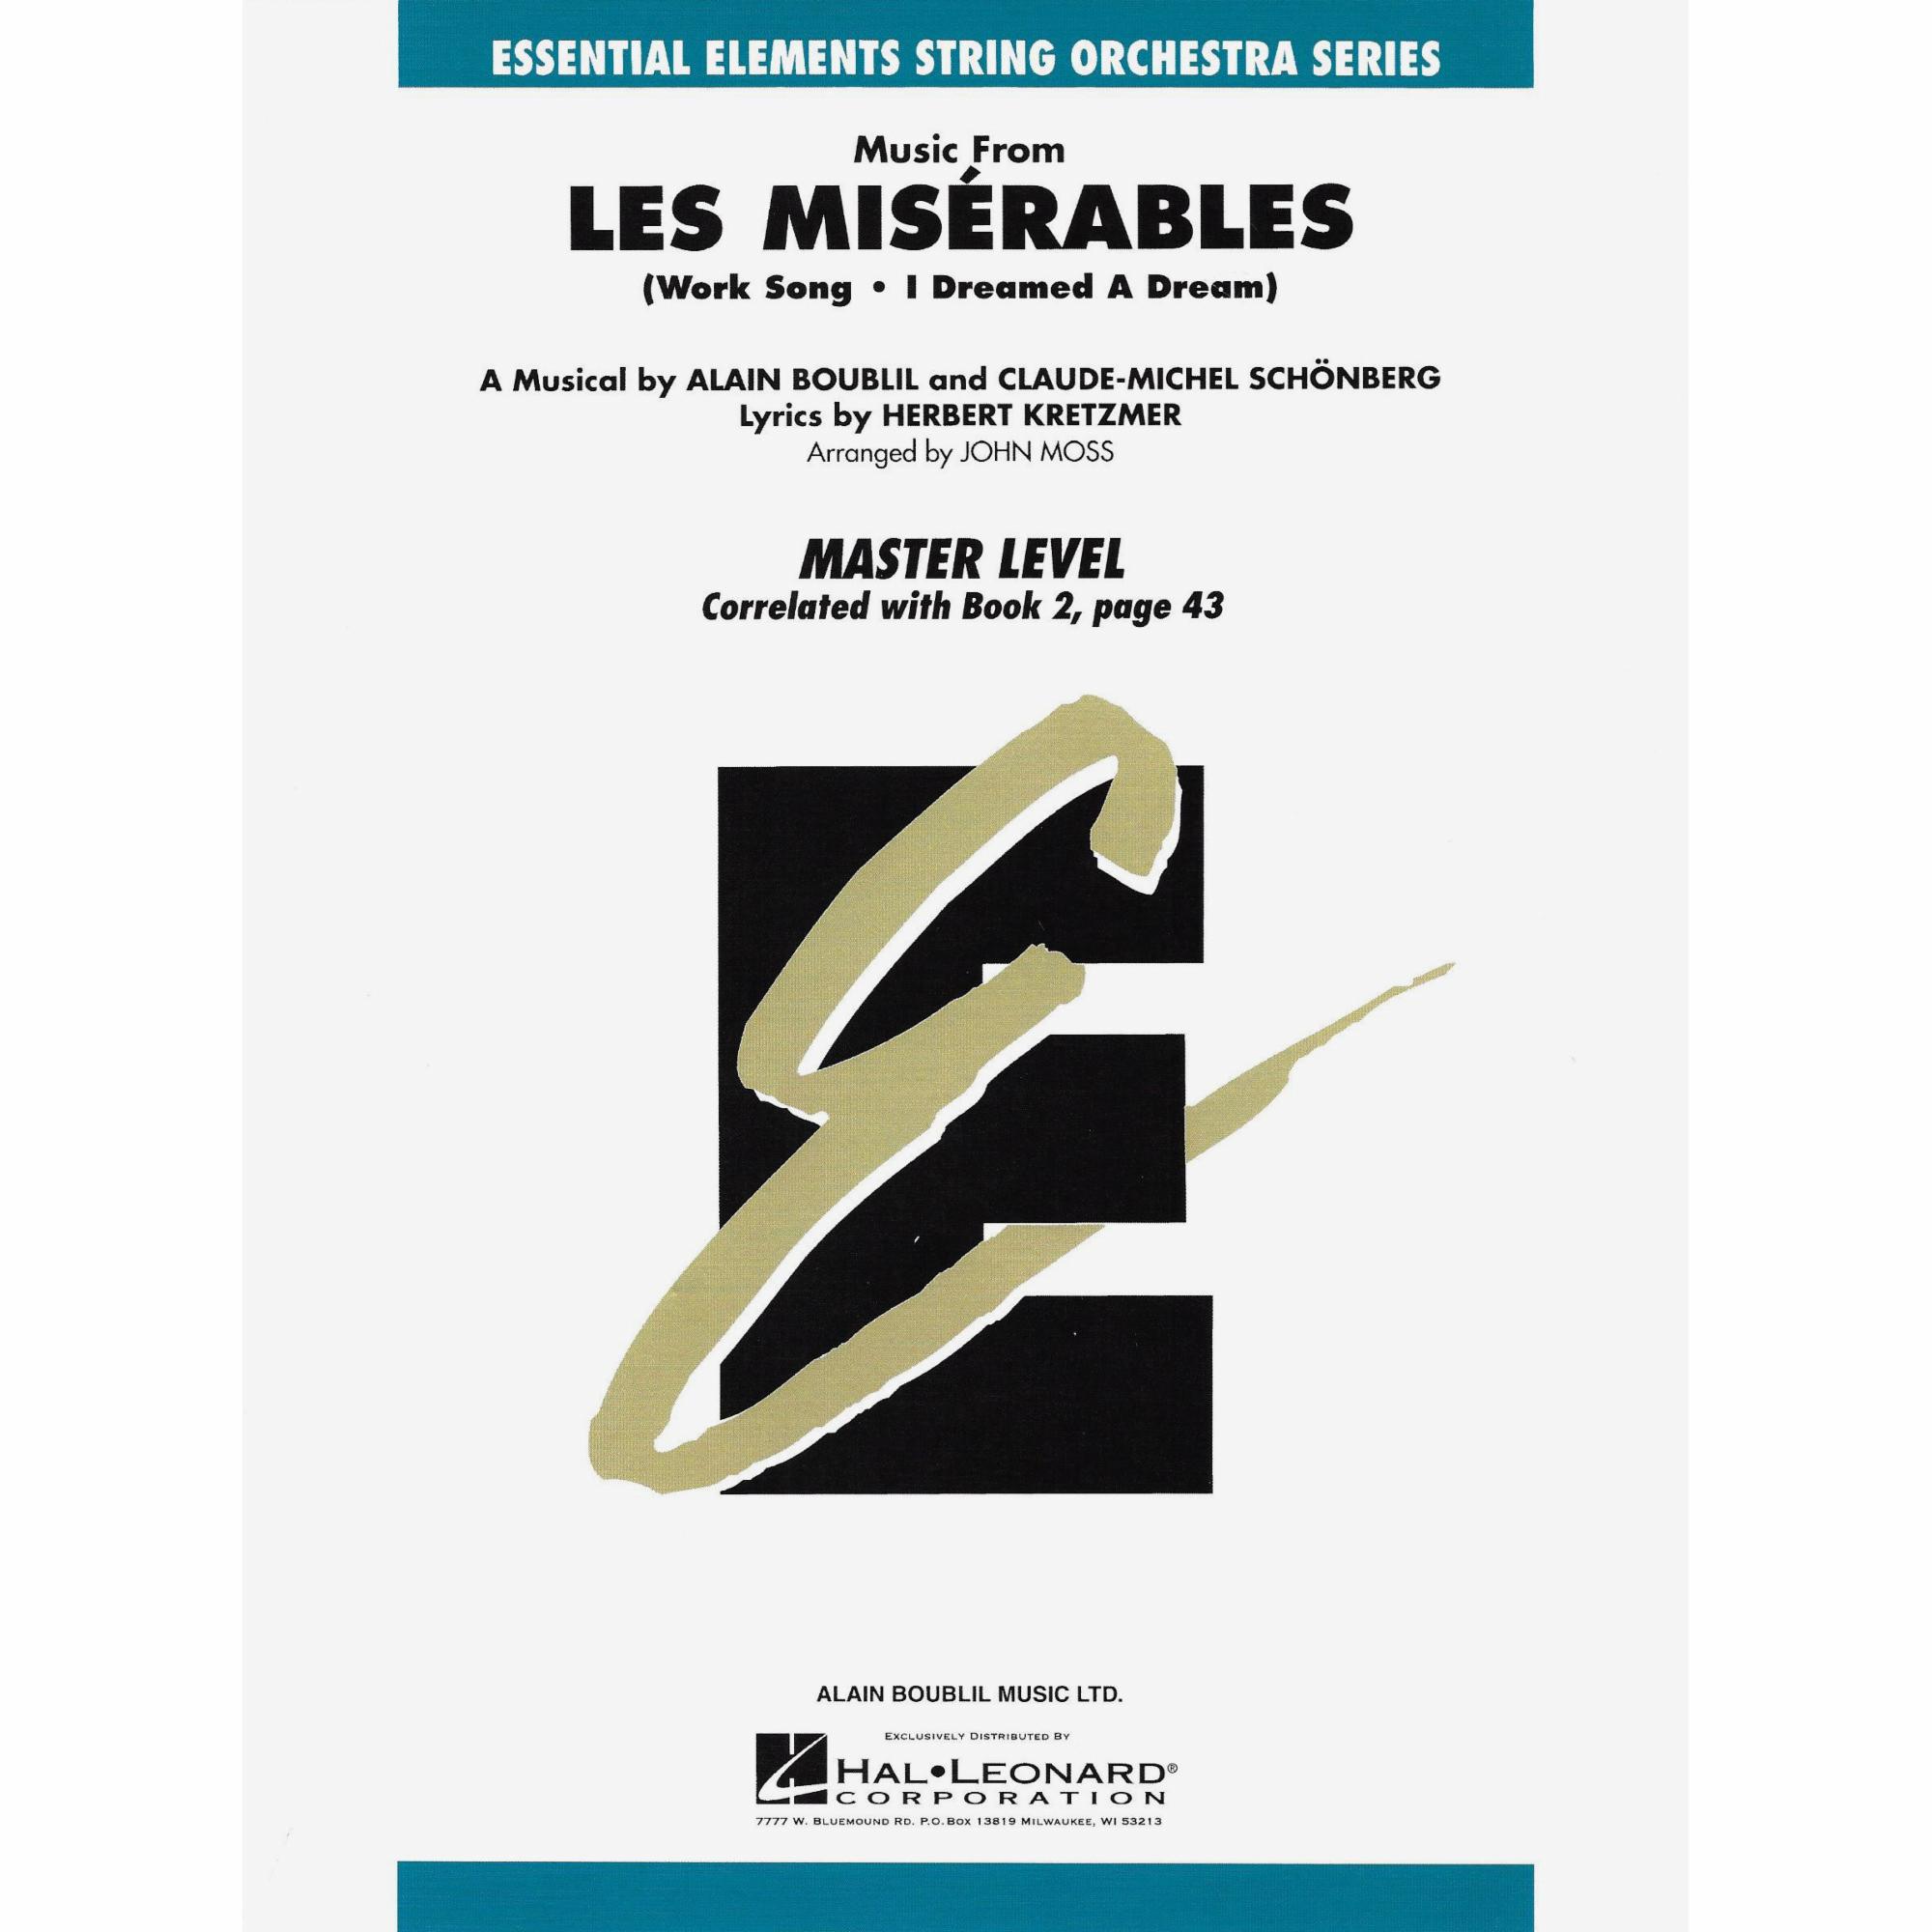 Music from Les Miserables for String Orchestra